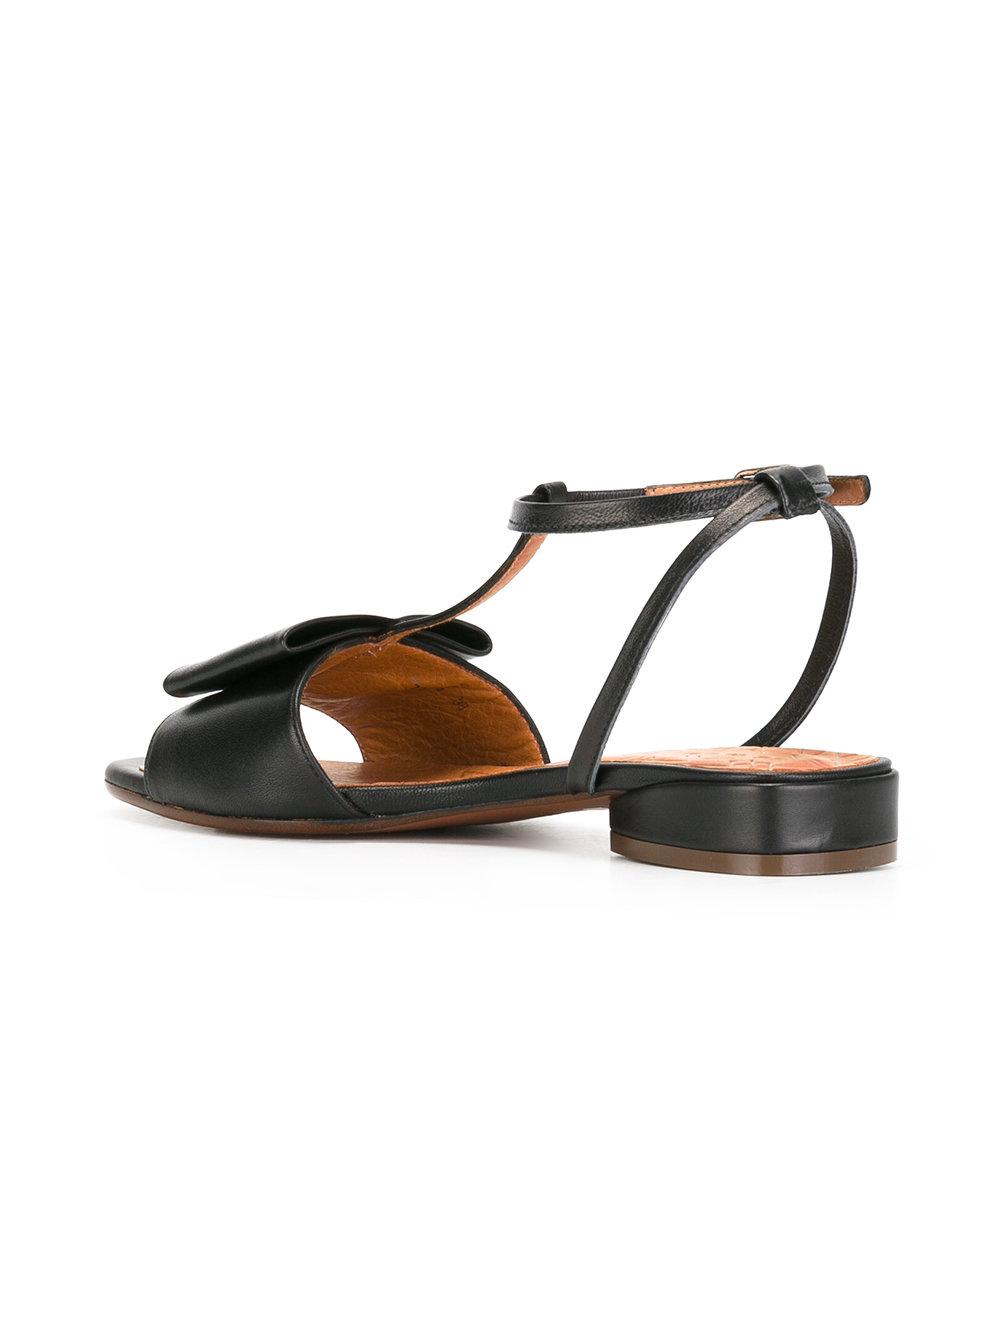 Chie Mihara Leather T-strap Flat Sandals in Black - Lyst